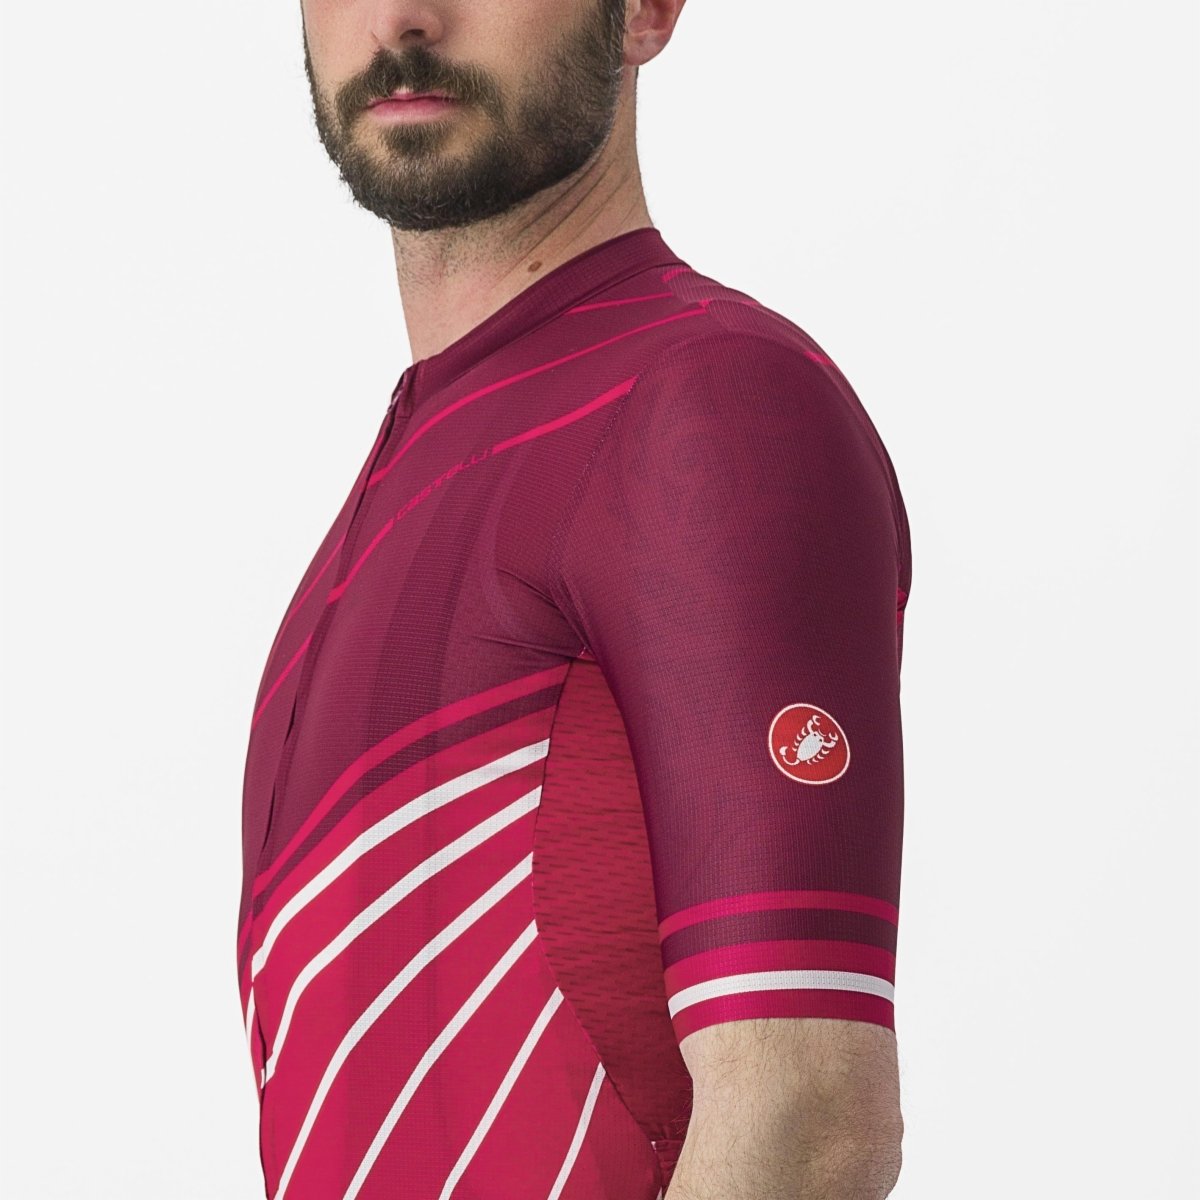 Castelli Speed Strada Men's Cycling Jersey (Bordeaux/Persian Red)